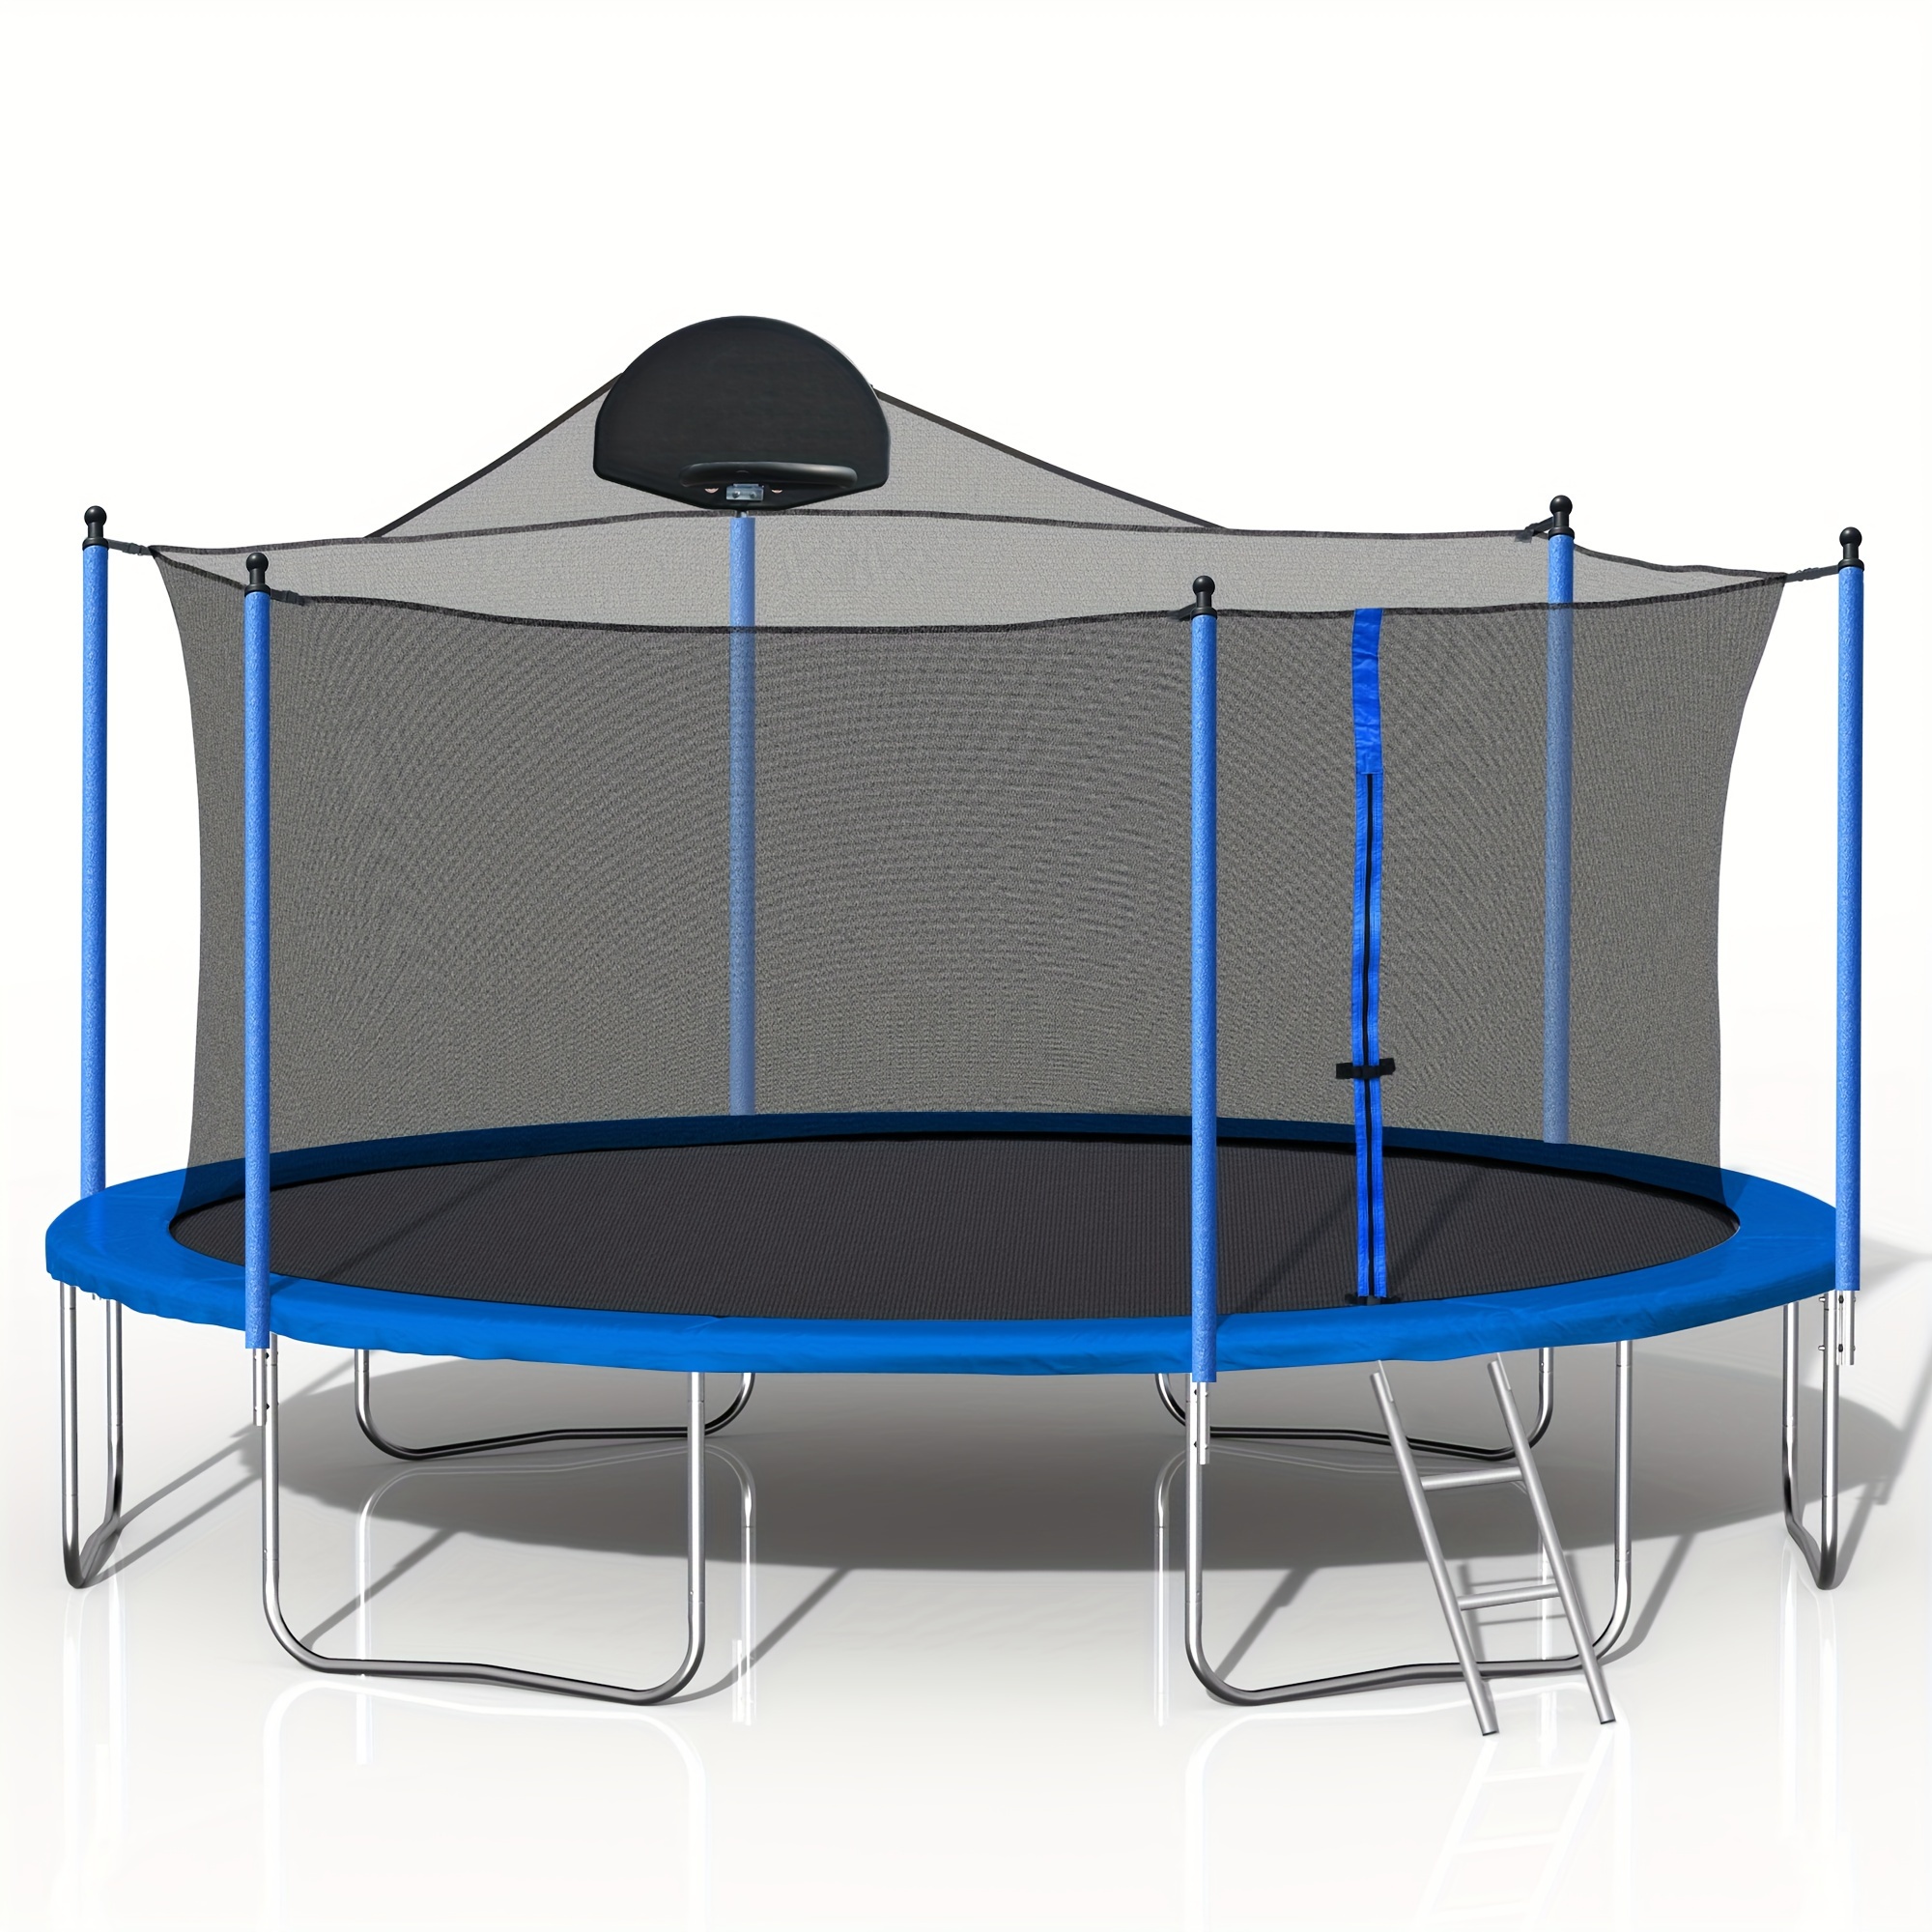 

14 Ft Trampoline With Safety Enclosure Net, Basketball Hoop And Ladder, Heavy Duty Outdoor Recreational Trampolines For Family, Easy Assembly, Blue